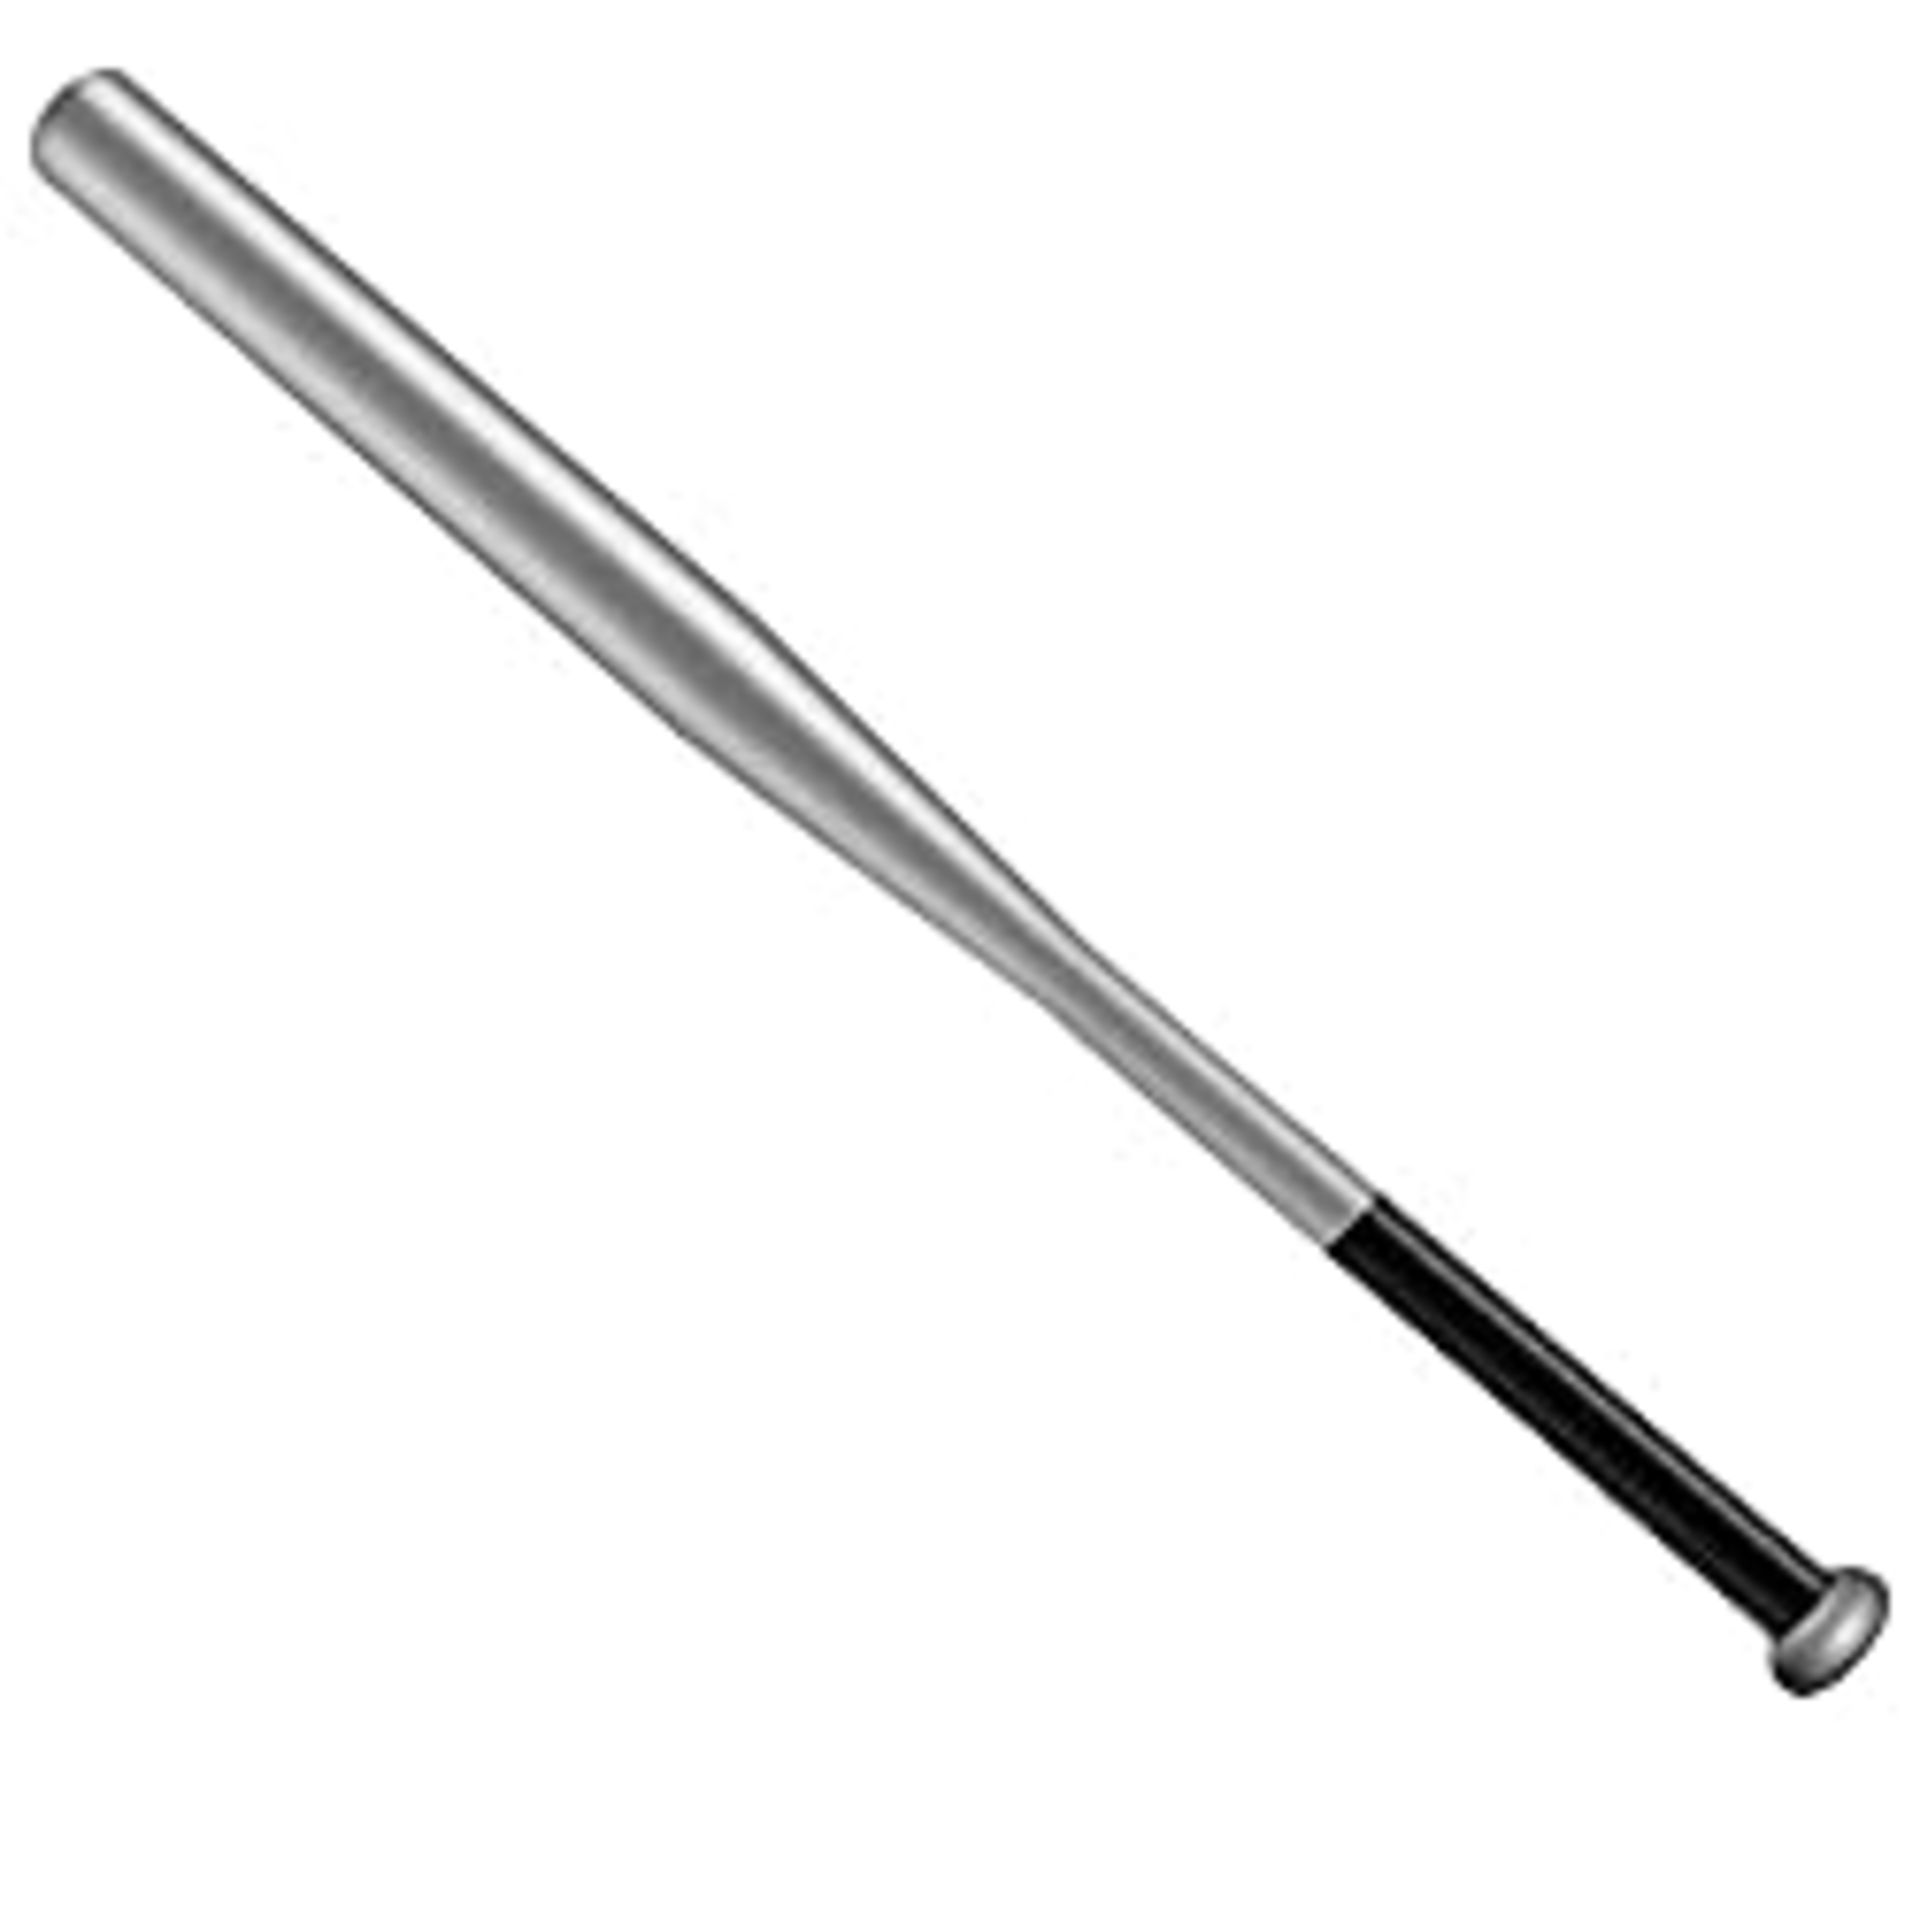 RRP £26.25 Tuggui Baseball Bat Steel 32 Inch with Carrying Bag (silver, 32'')